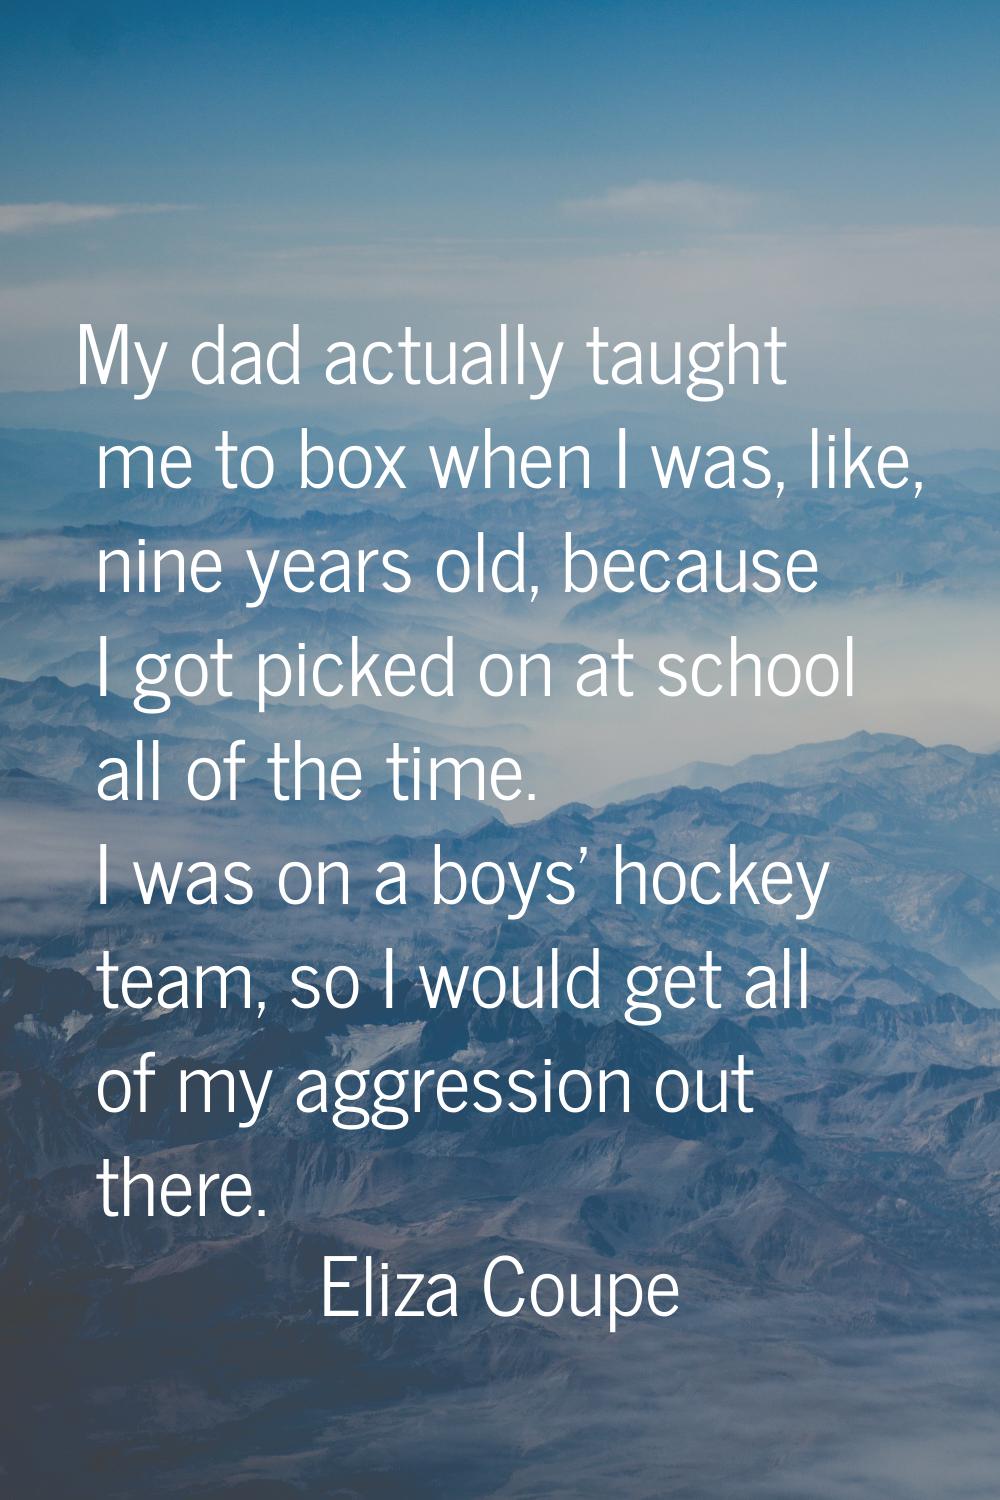 My dad actually taught me to box when I was, like, nine years old, because I got picked on at schoo